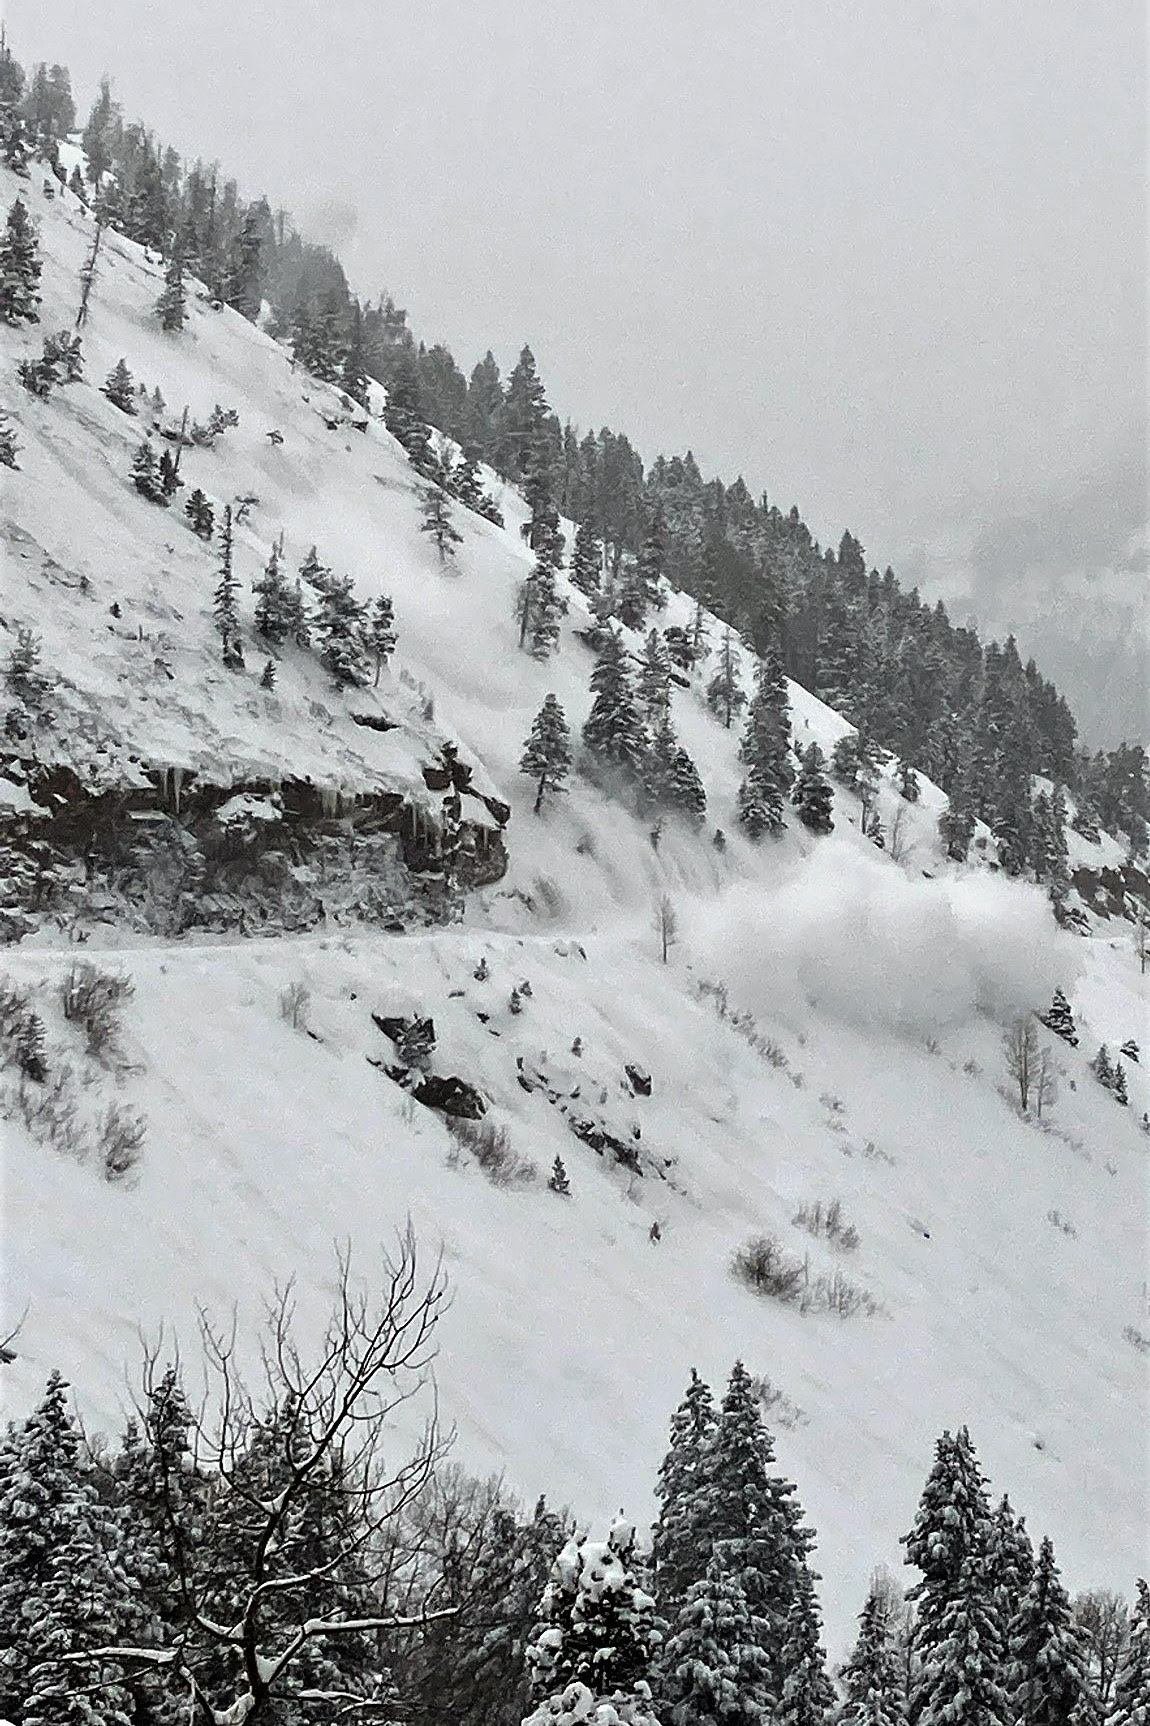 Avalanche along the mountainside detail image